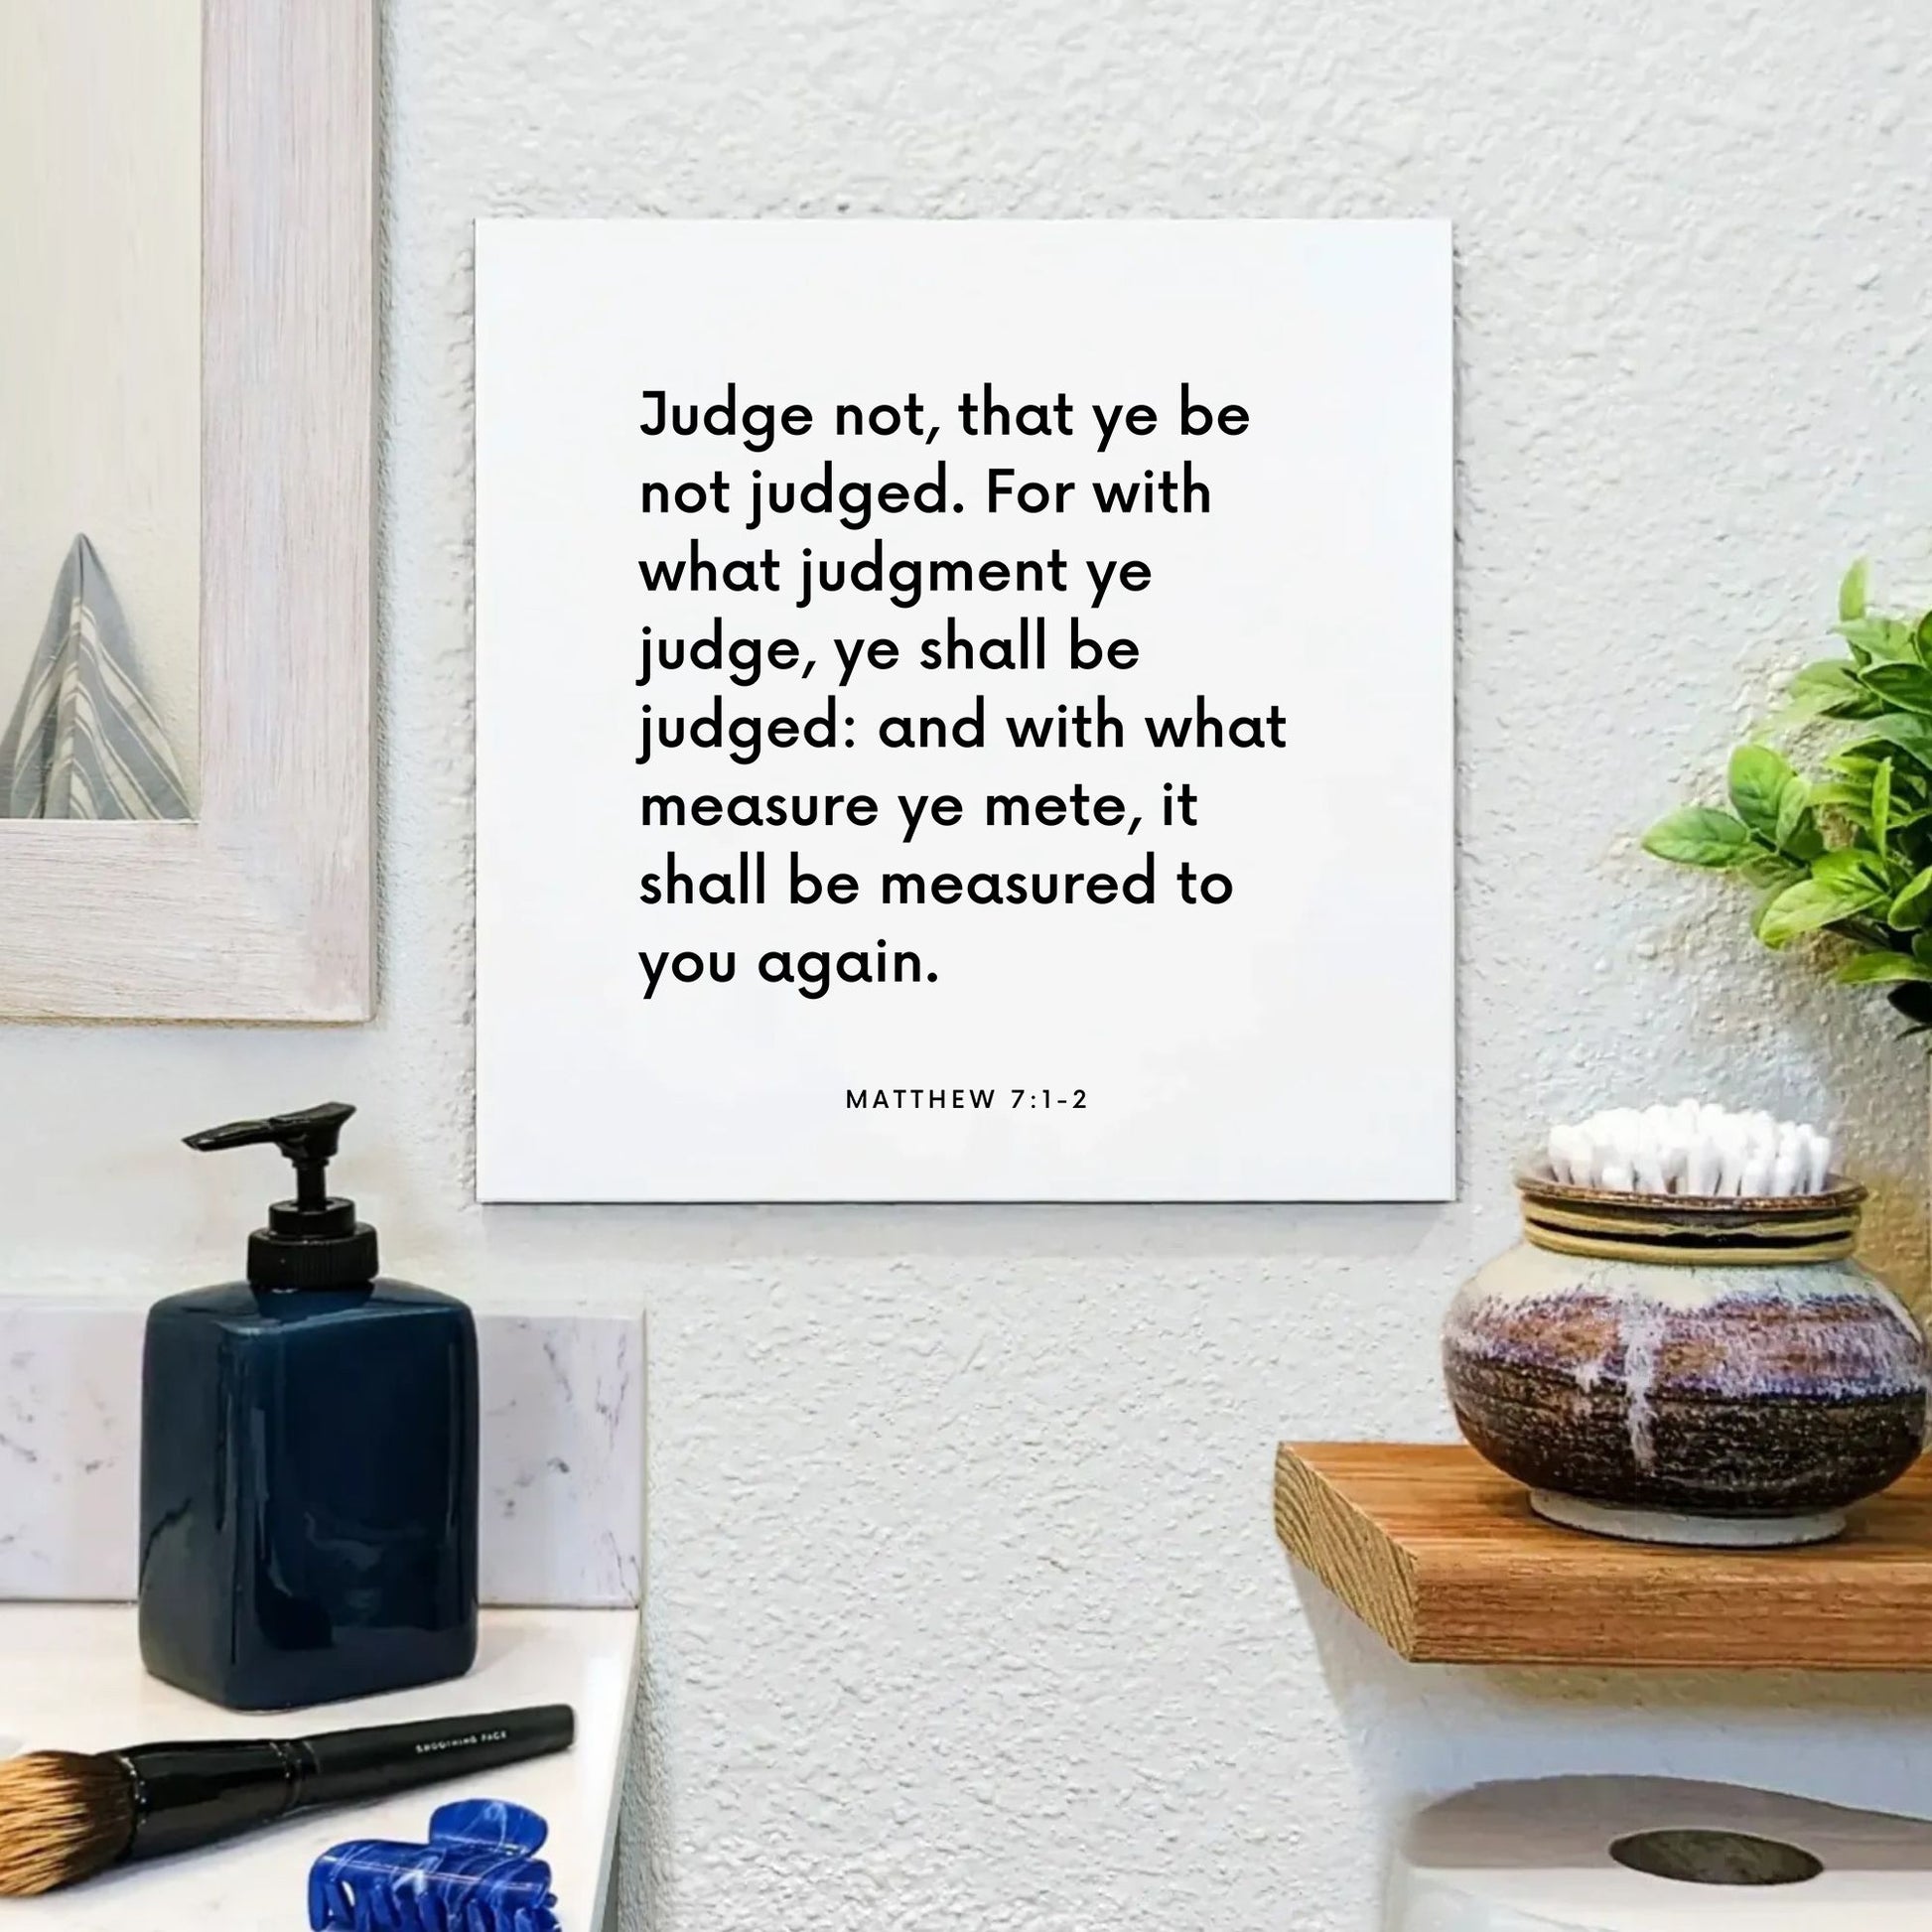 Bathroom mouting of the scripture tile for Matthew 7:1-2 - "Judge not, that ye be not judged"